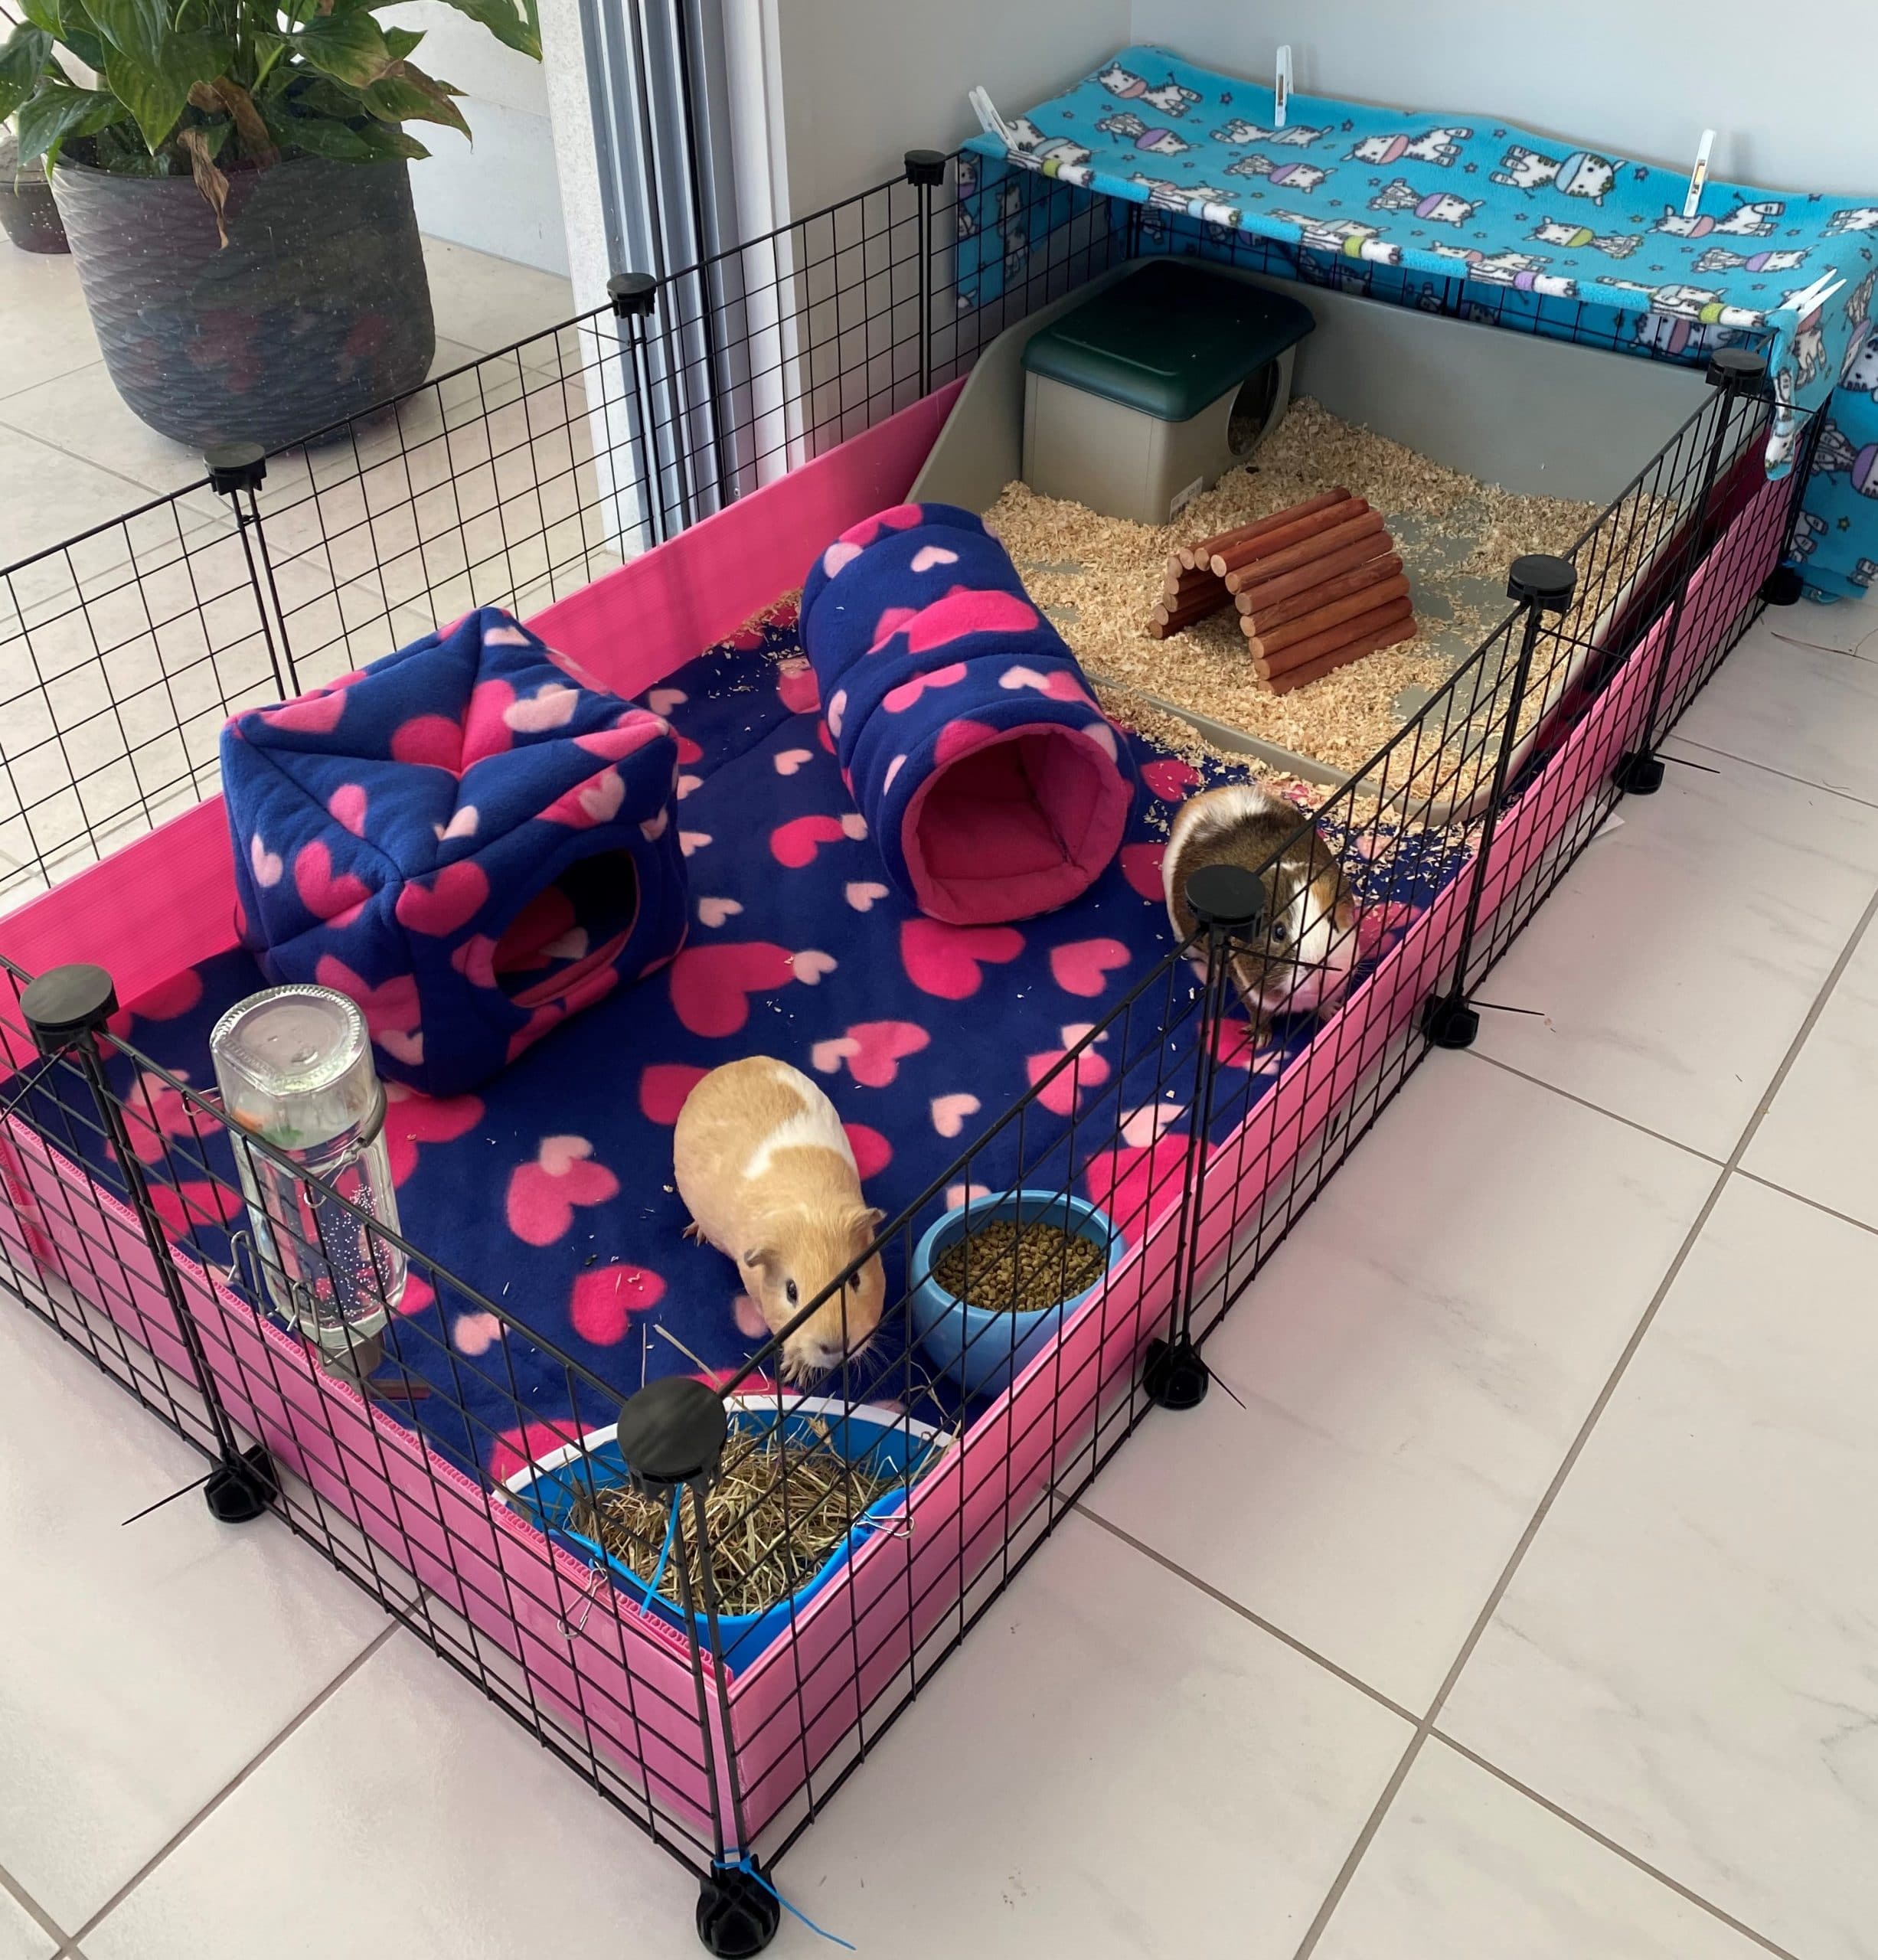 What cage to choose for a guinea pig?